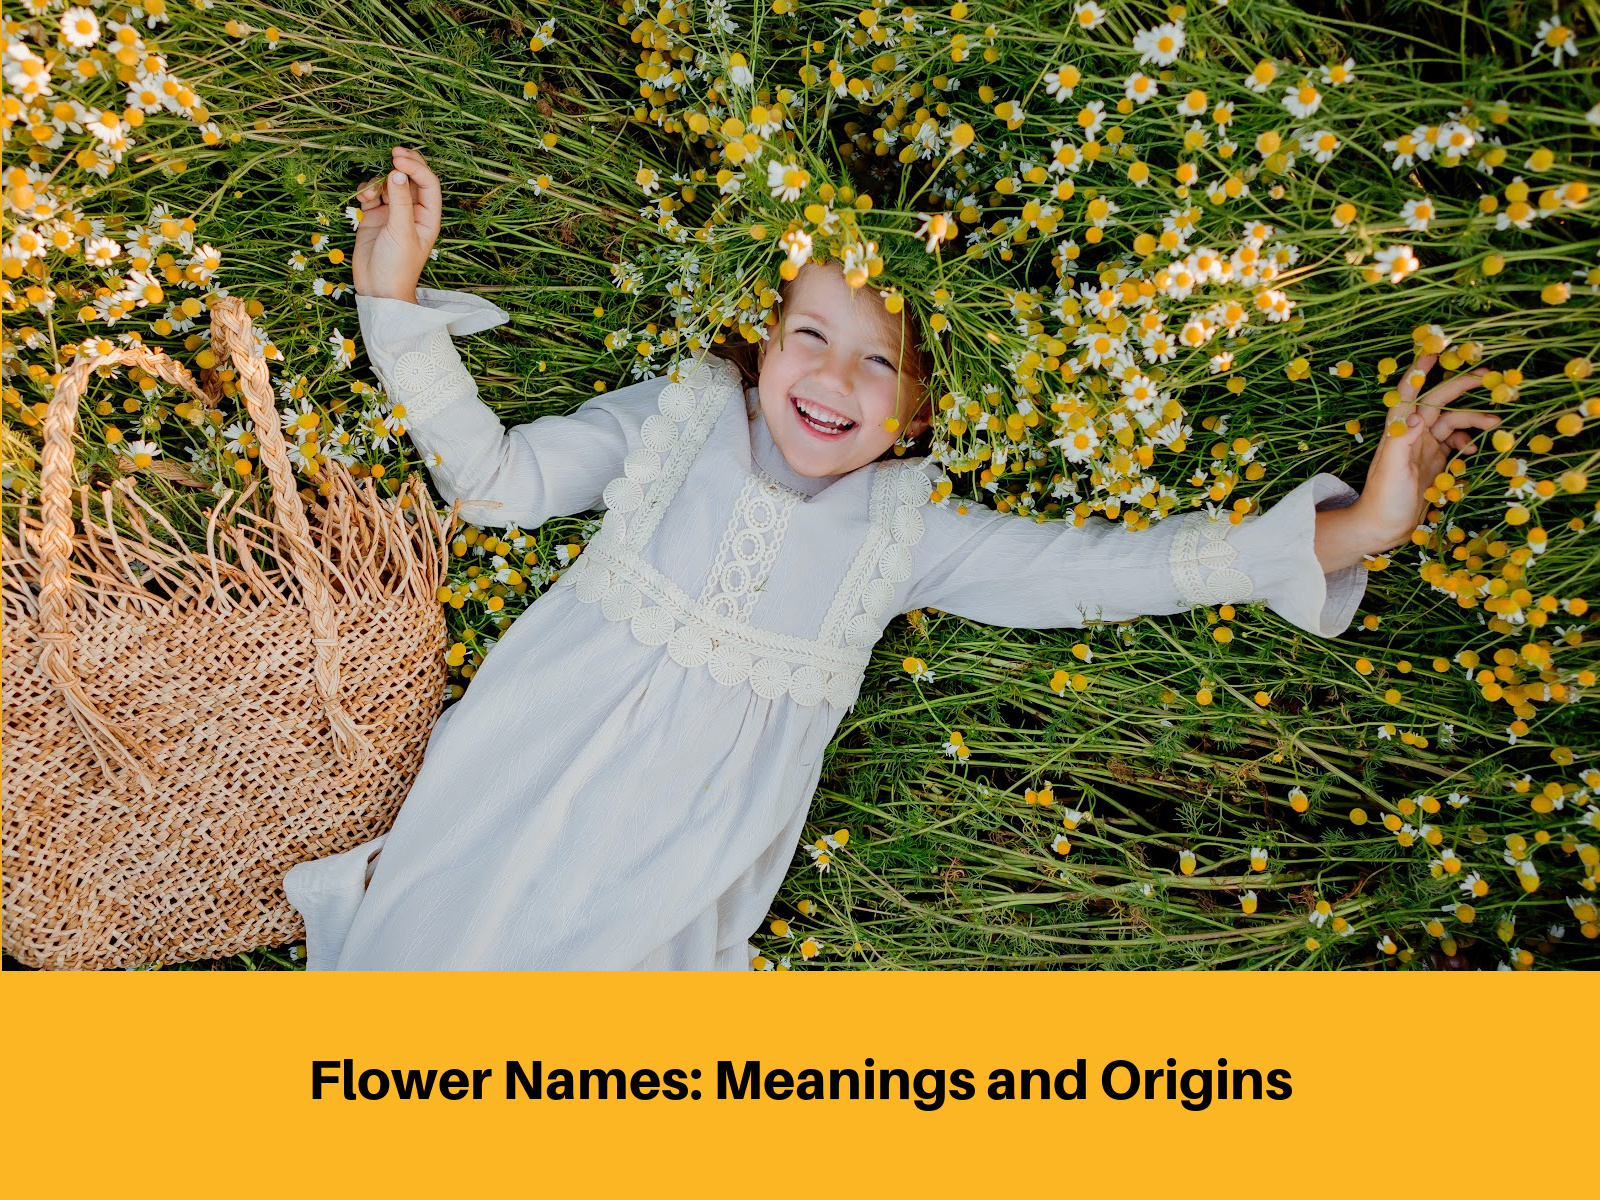 Flower Names: Meanings and Origins